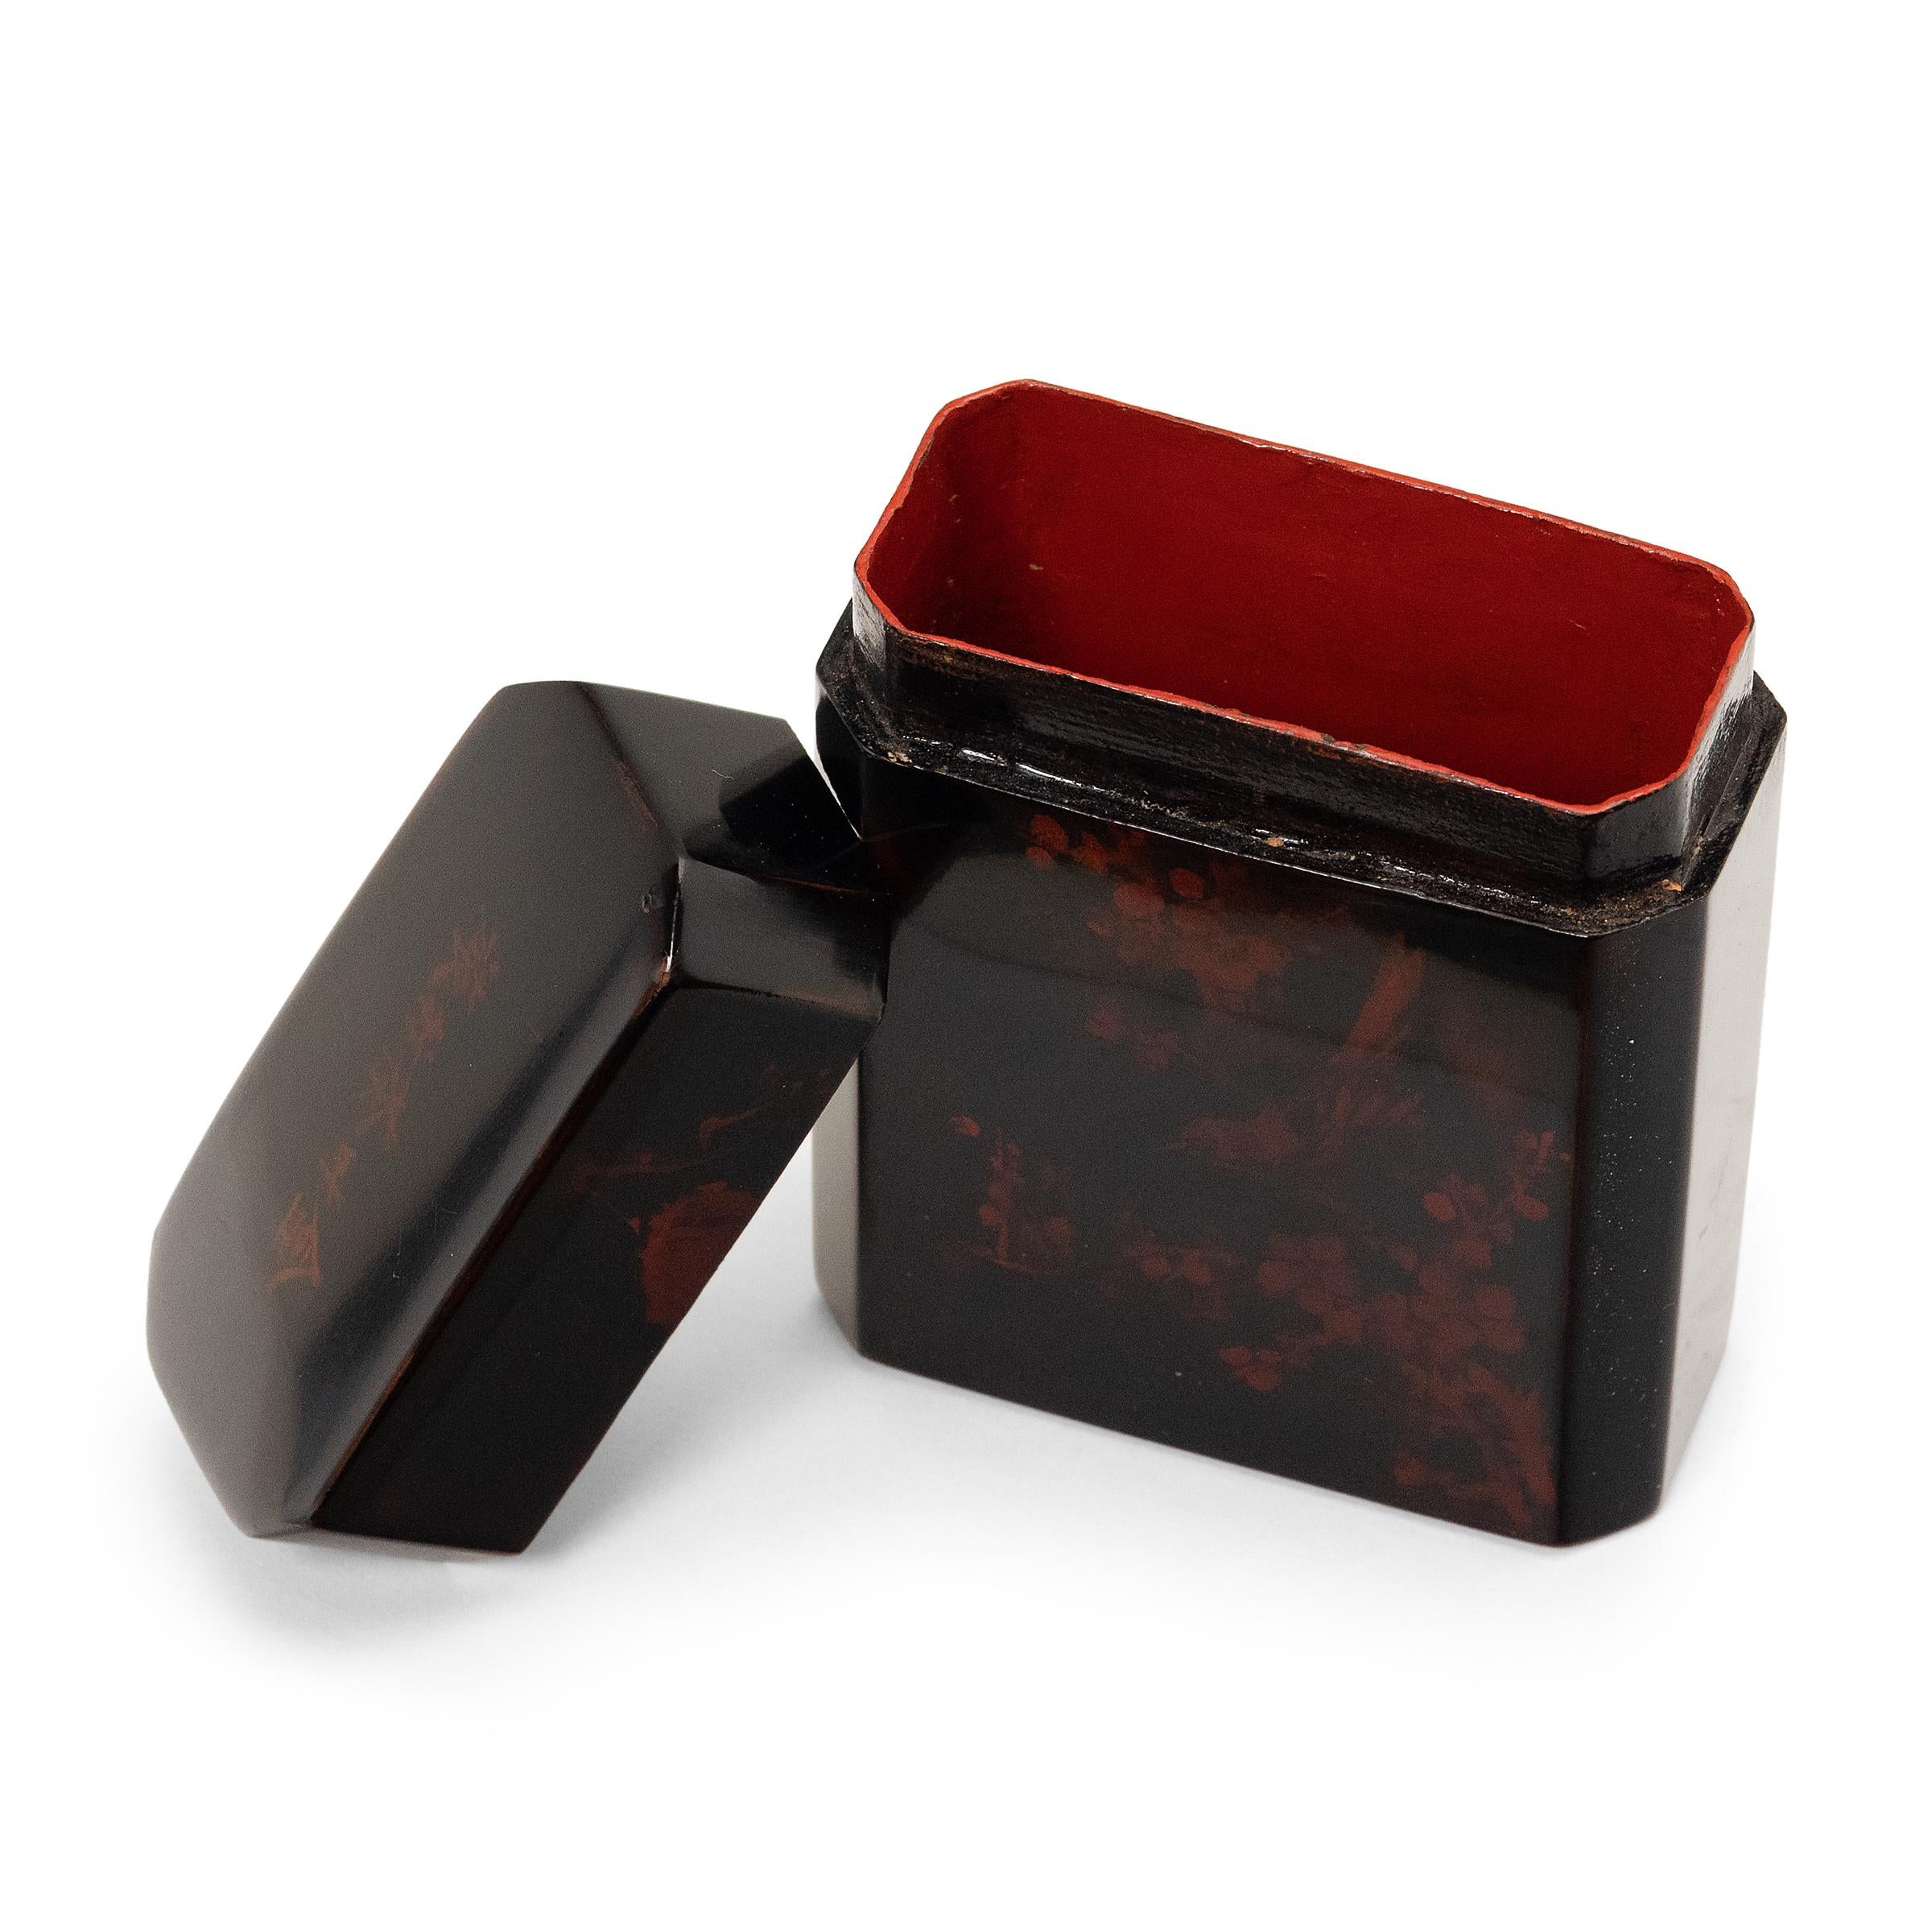 Meiji Red-and-Black Lacquer Chinese Travel Tea Box, c. 1940